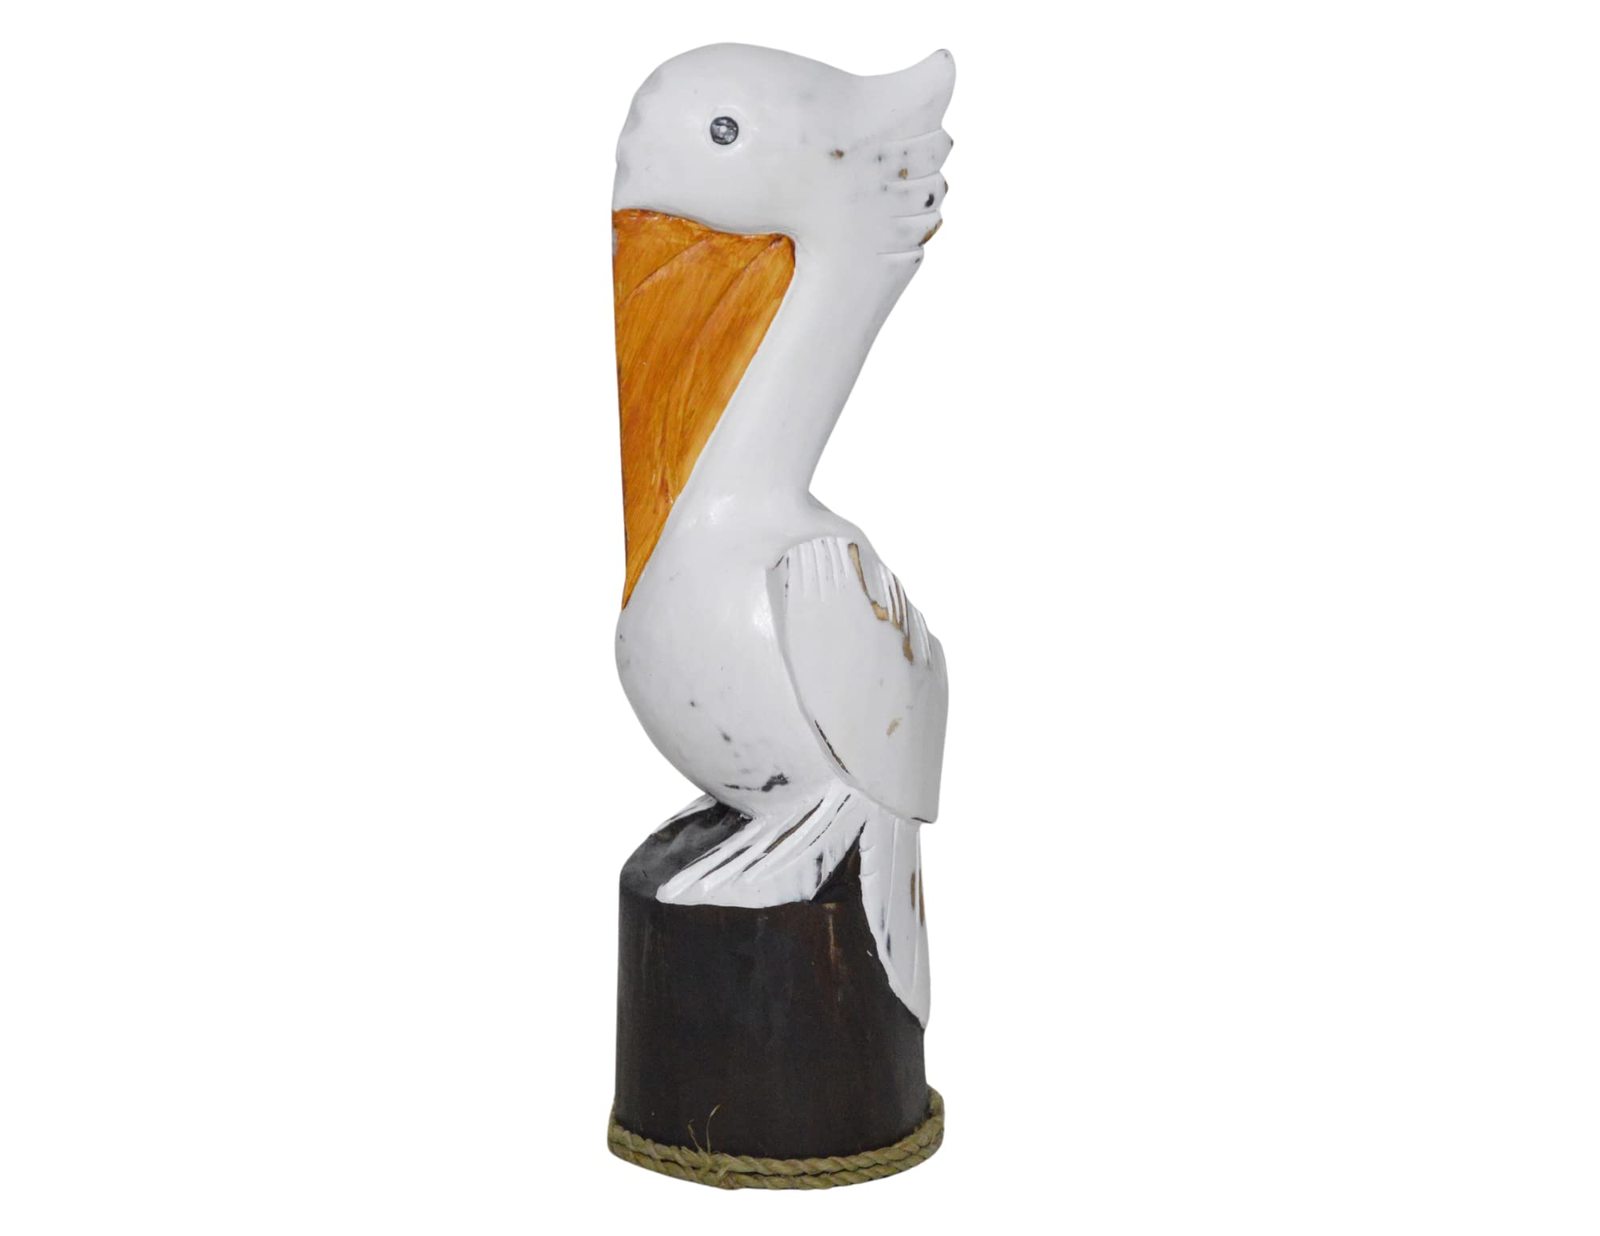 Primary image for WorldBazzar 14" Hand Carved Wood White Pelican Nautical Statue Art